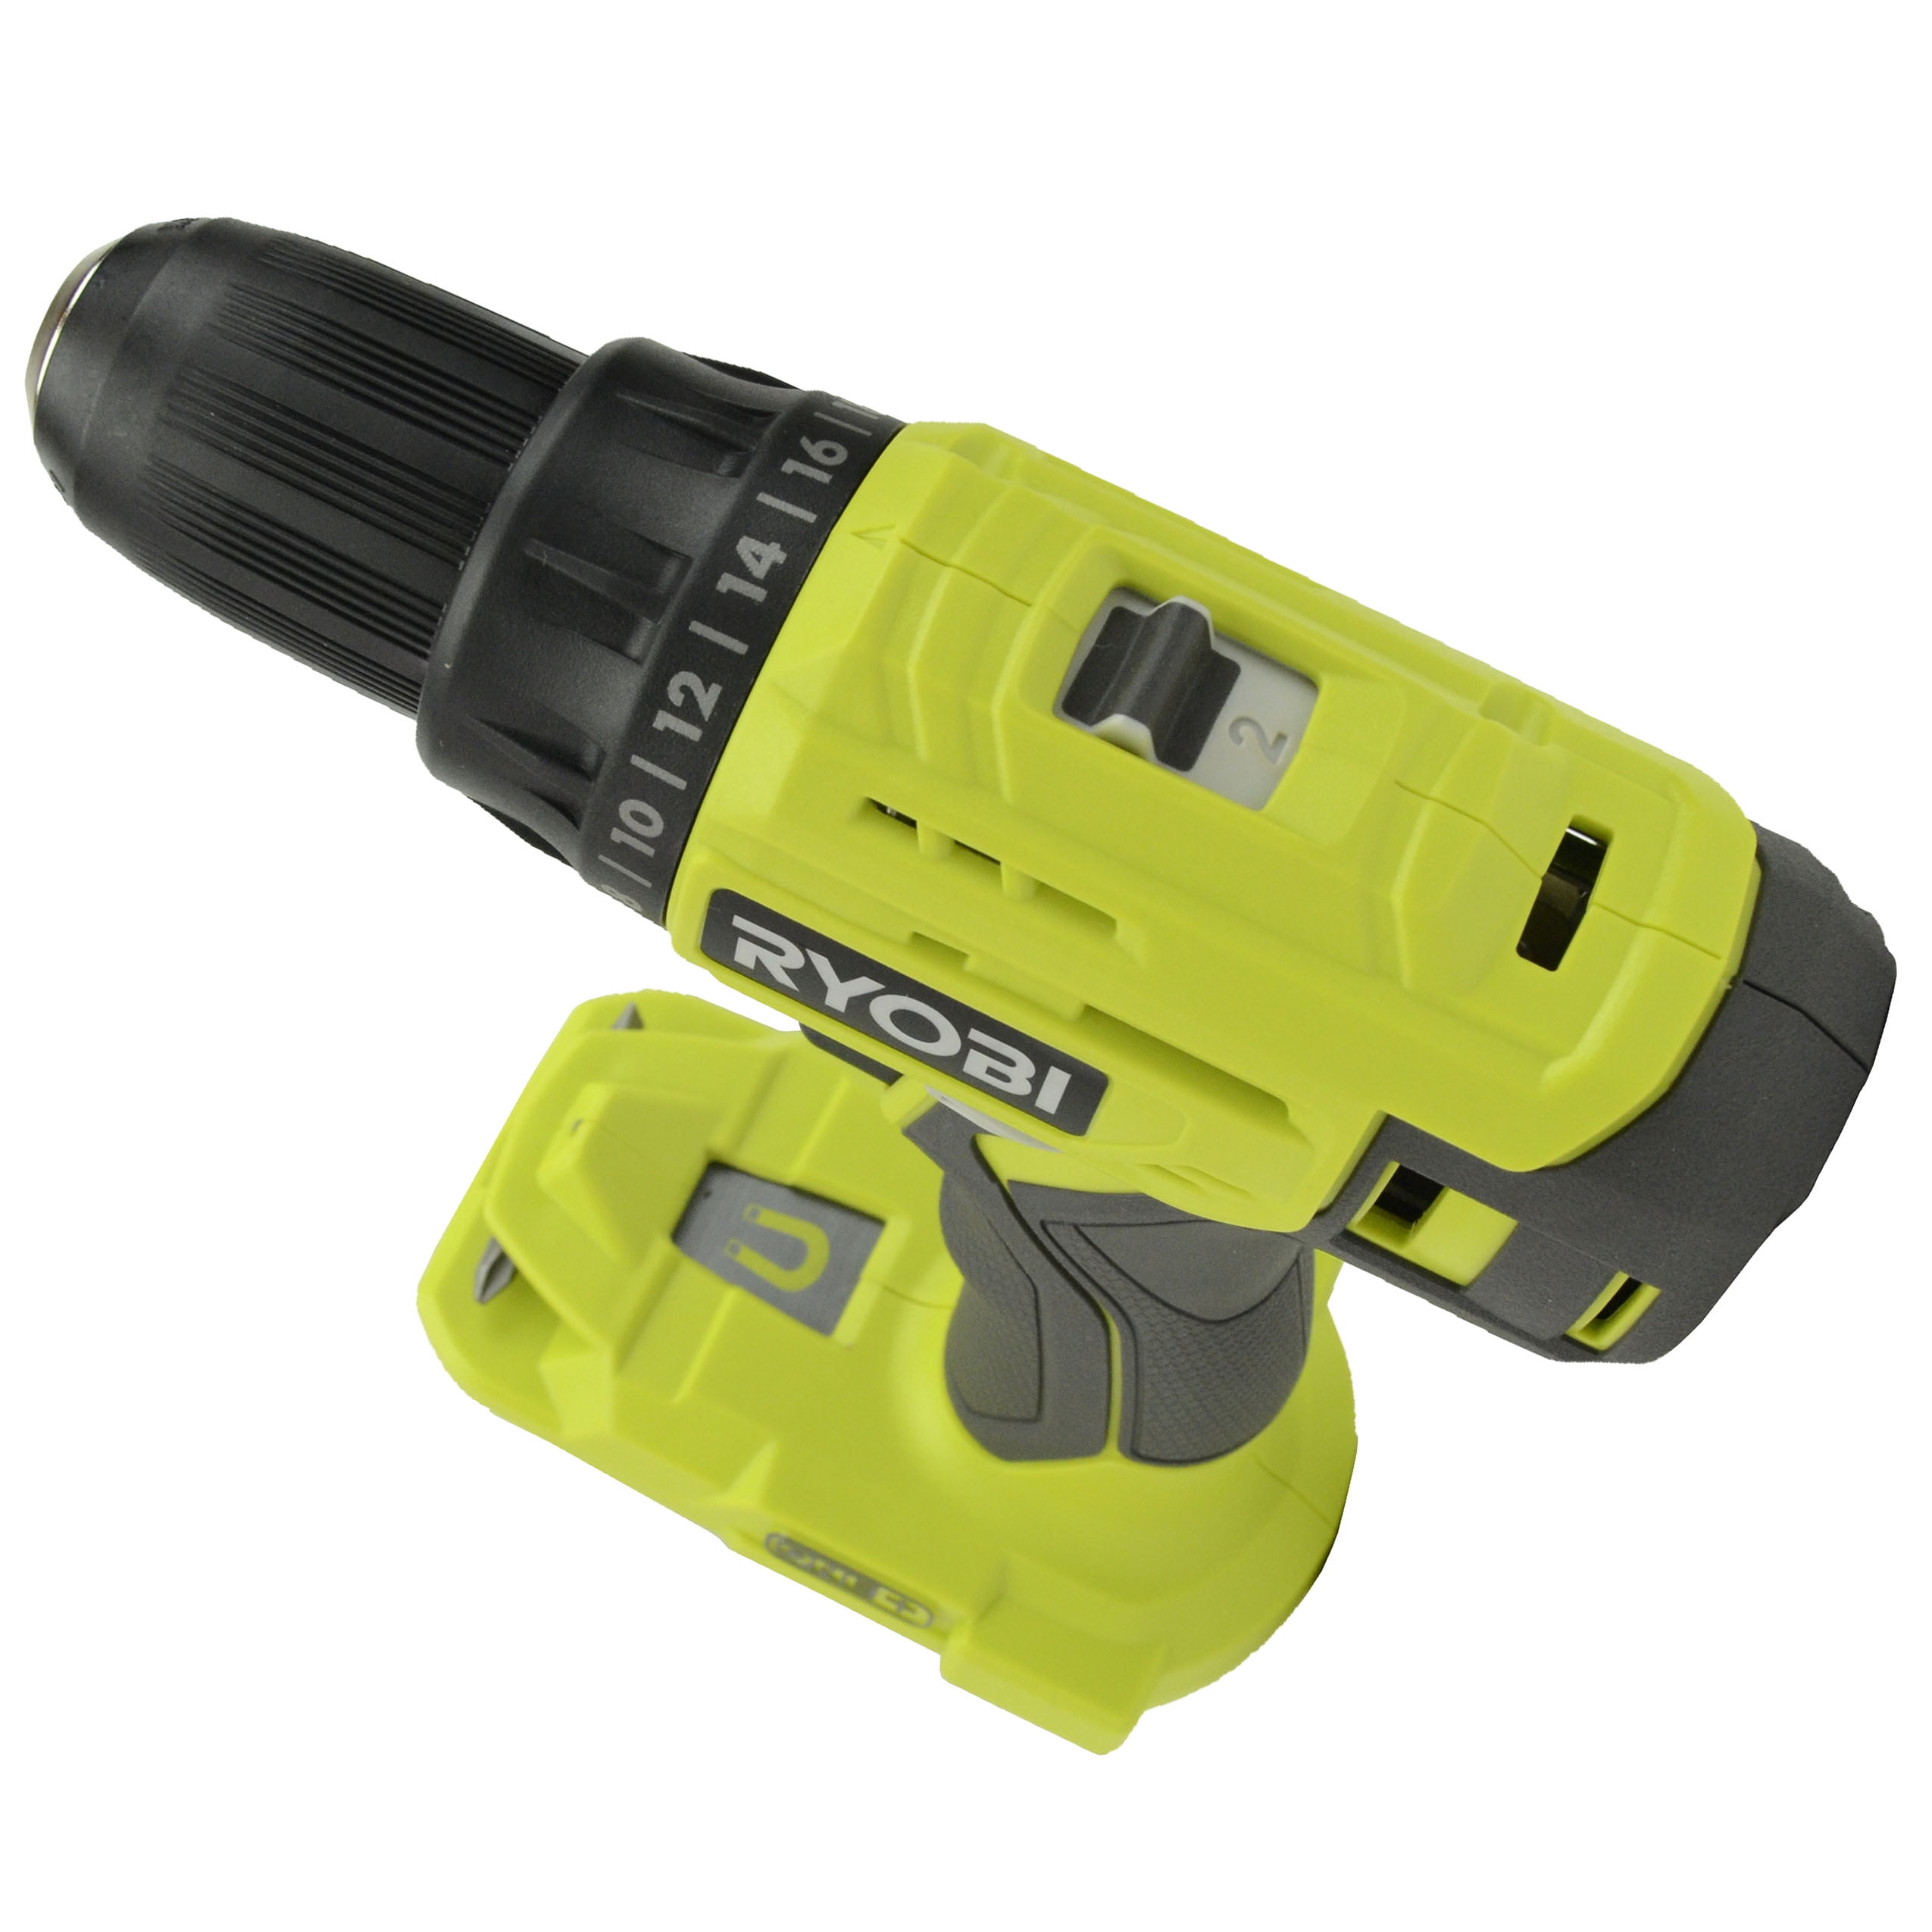 Drill Driver Kit for sale online Ryobi P215 One 18v Cordless 1/2 In 